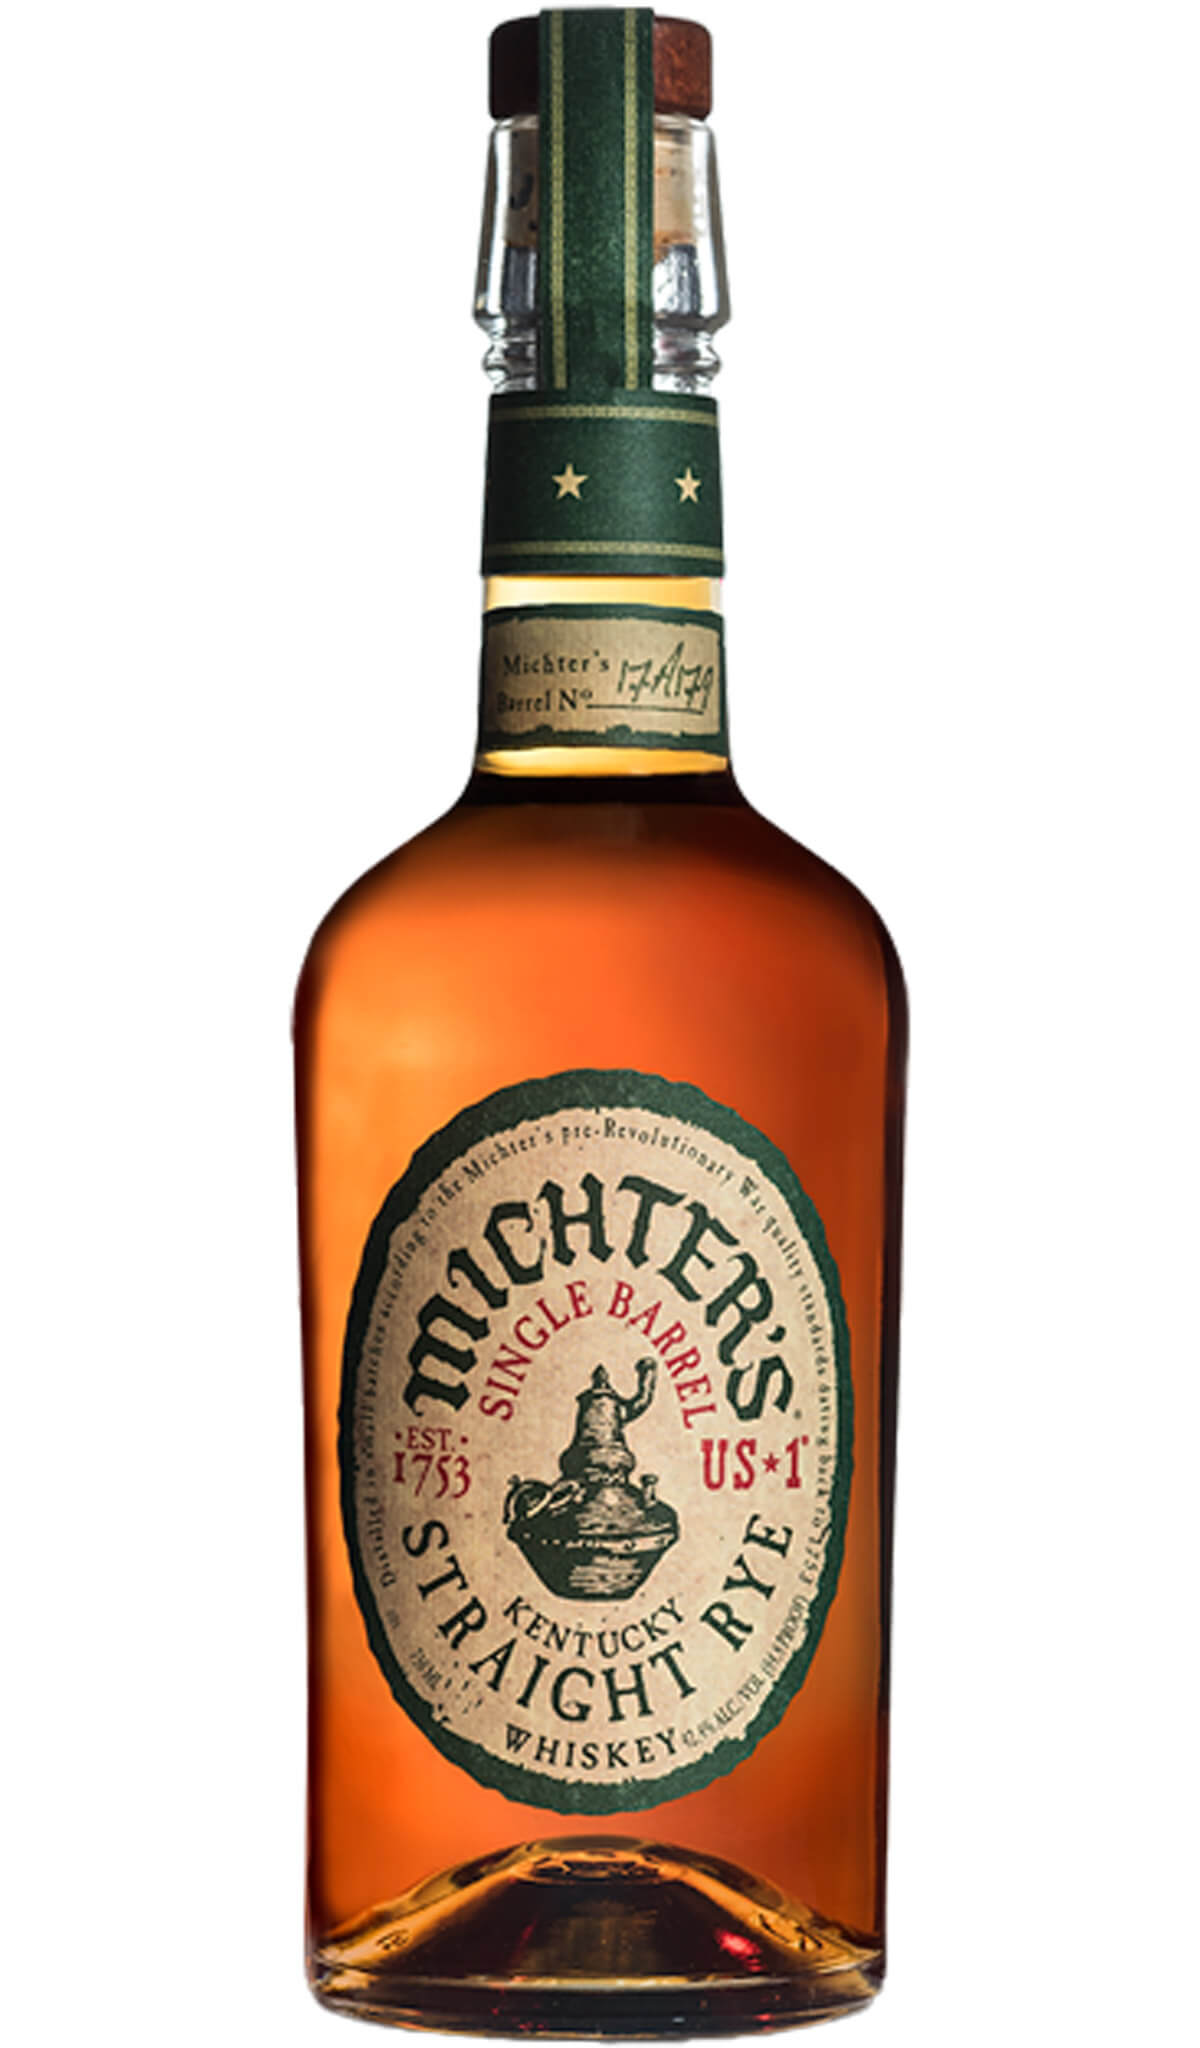 Find out more, explore the range and purchase Michter’s US1 Single Barrel Straight Rye 700ml available online at Wine Sellers Direct - Australia's independent liquor specialists.